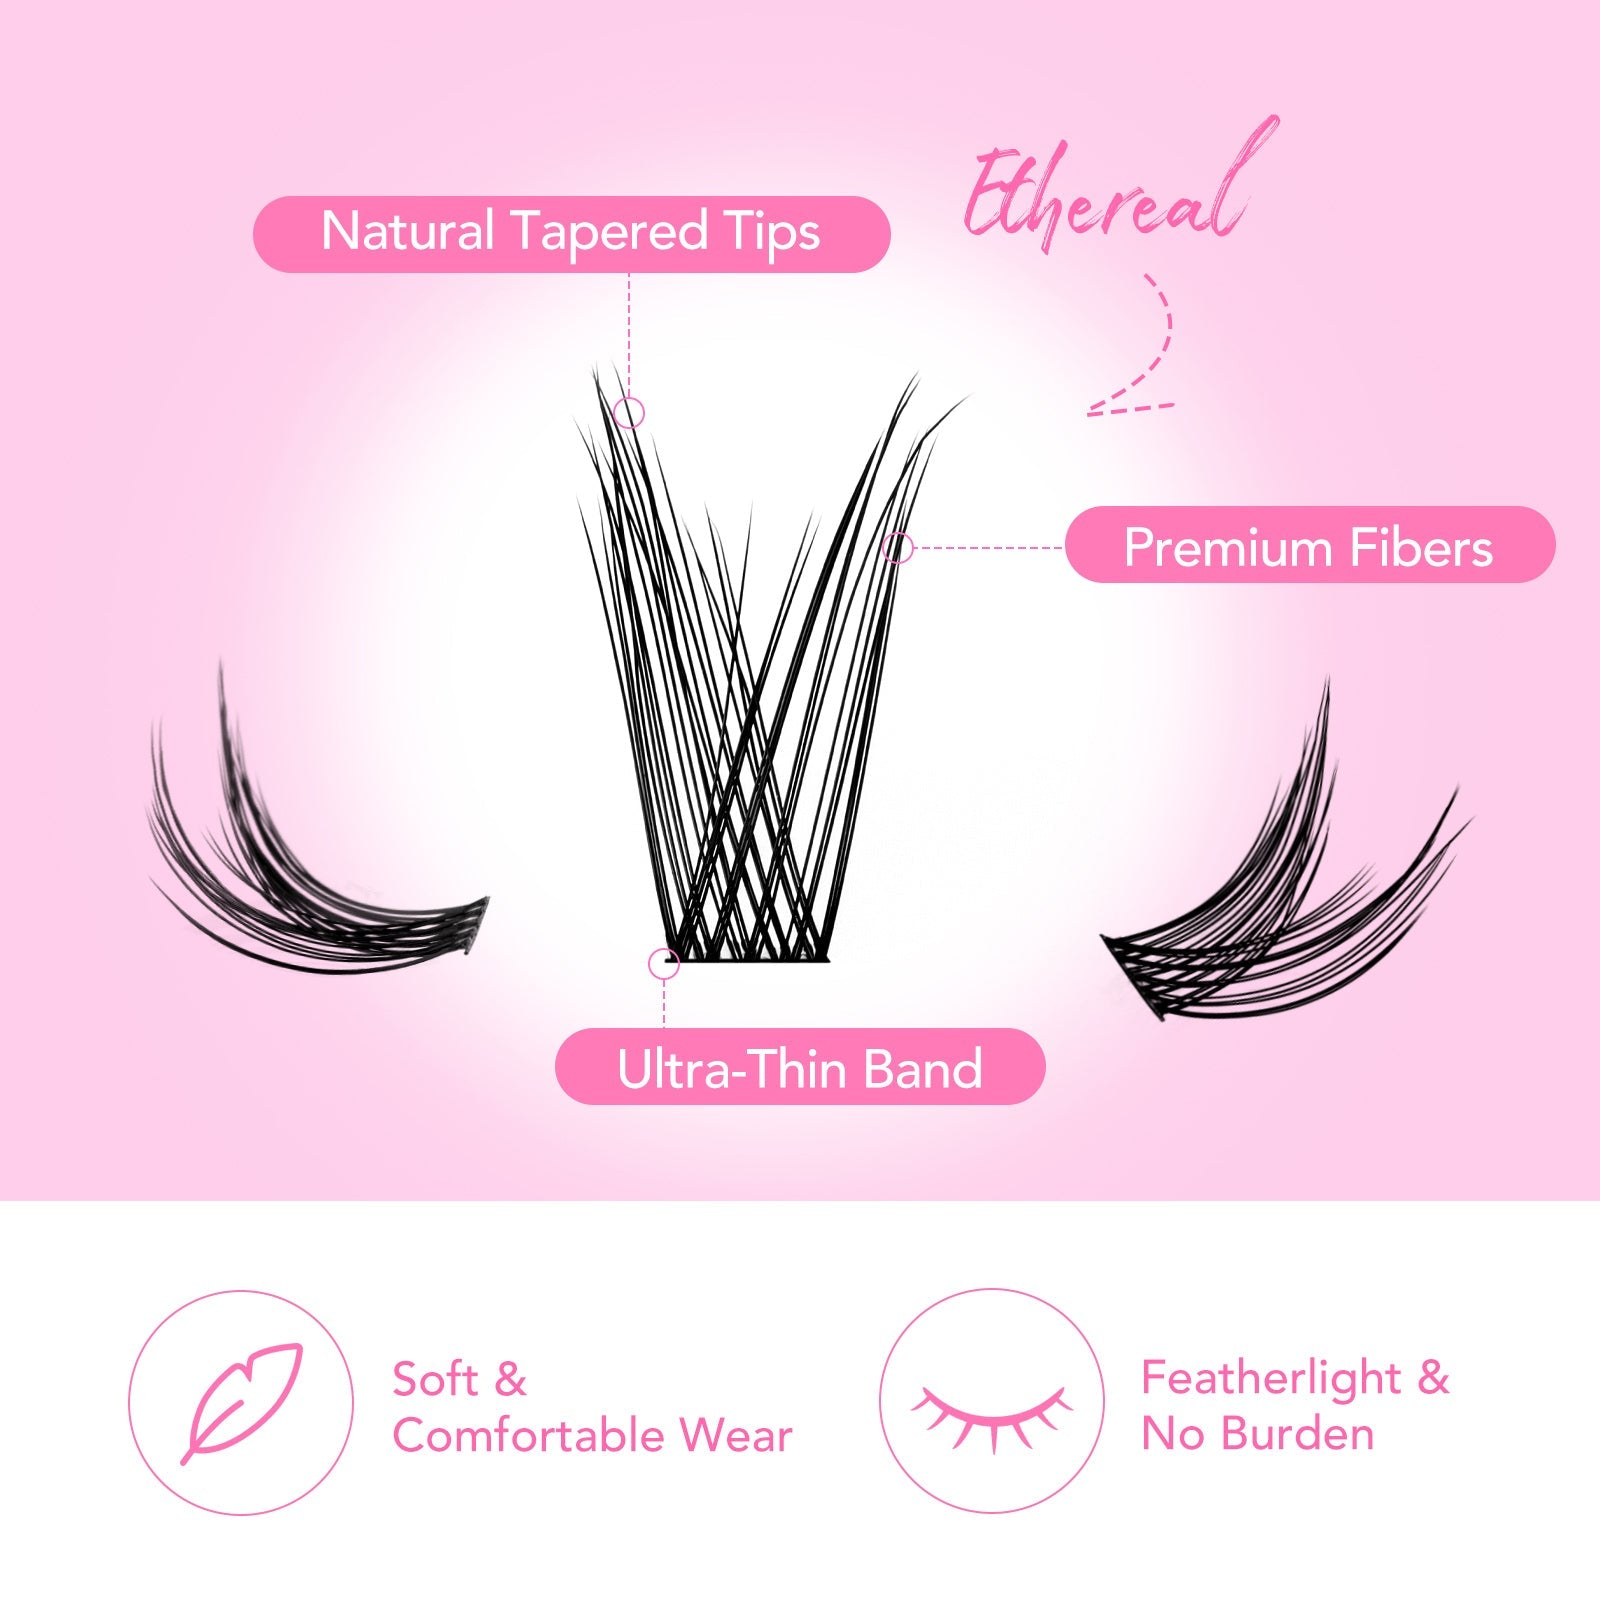 ETHEREAL DIY Cluster Lashes - Calailis Beauty